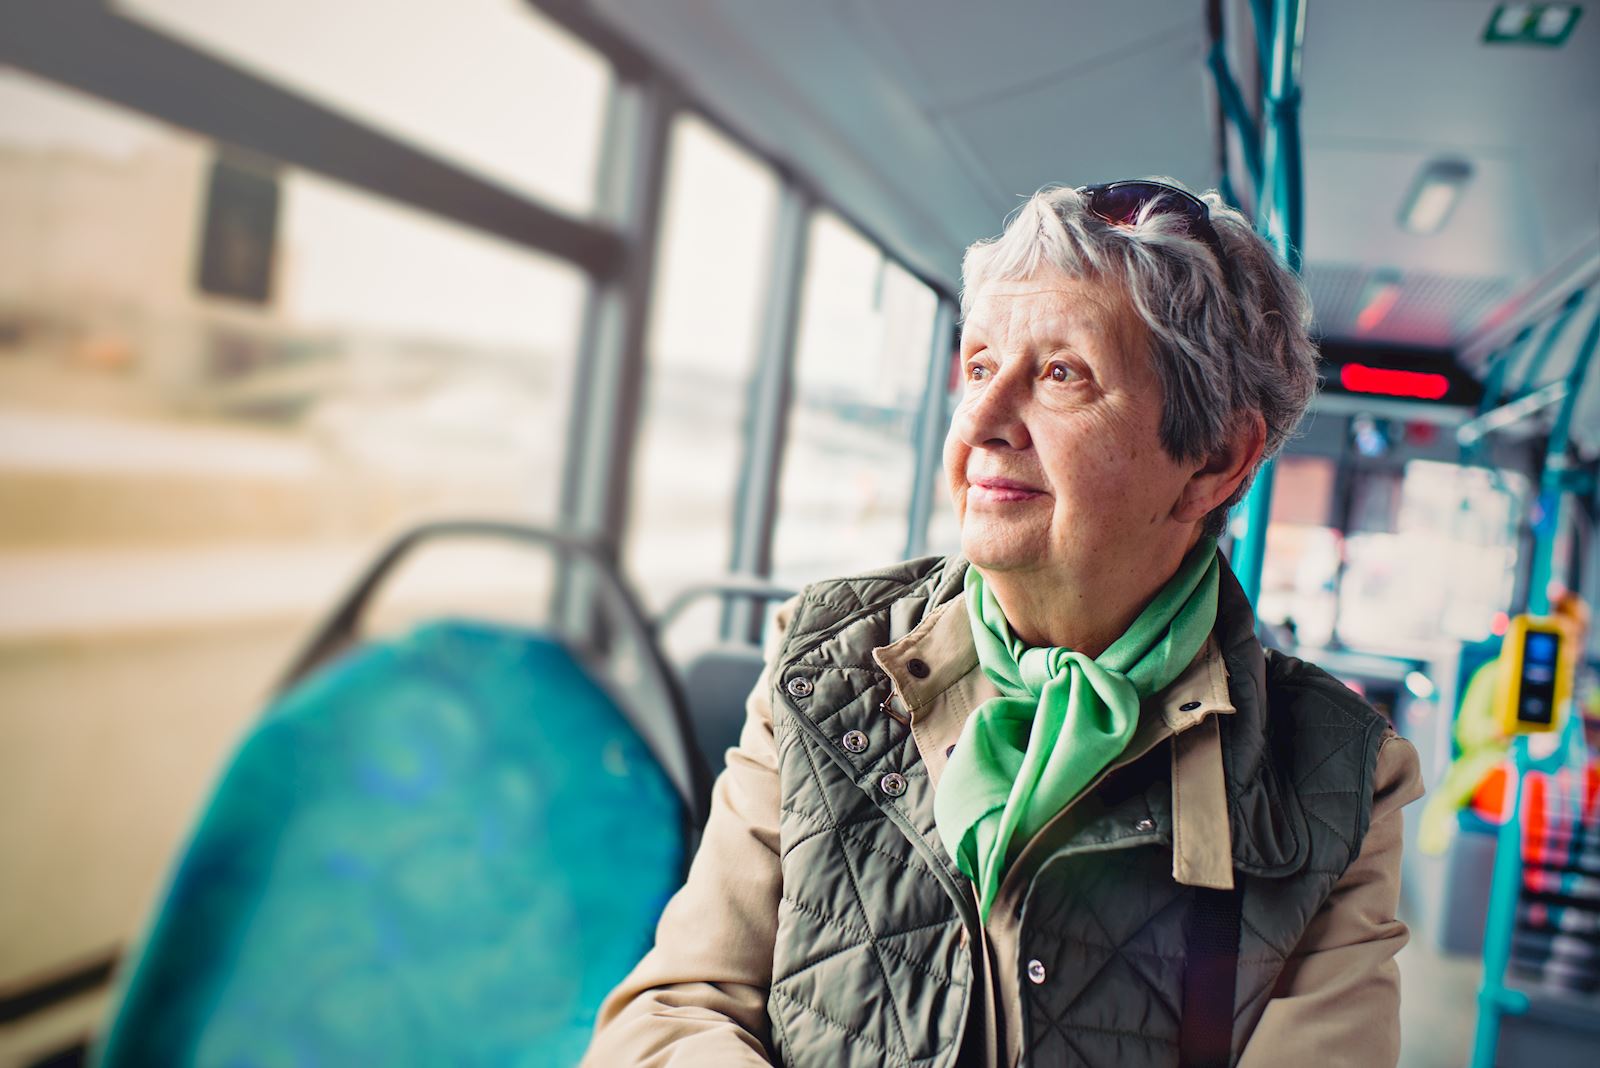 Where to find transportation for seniors